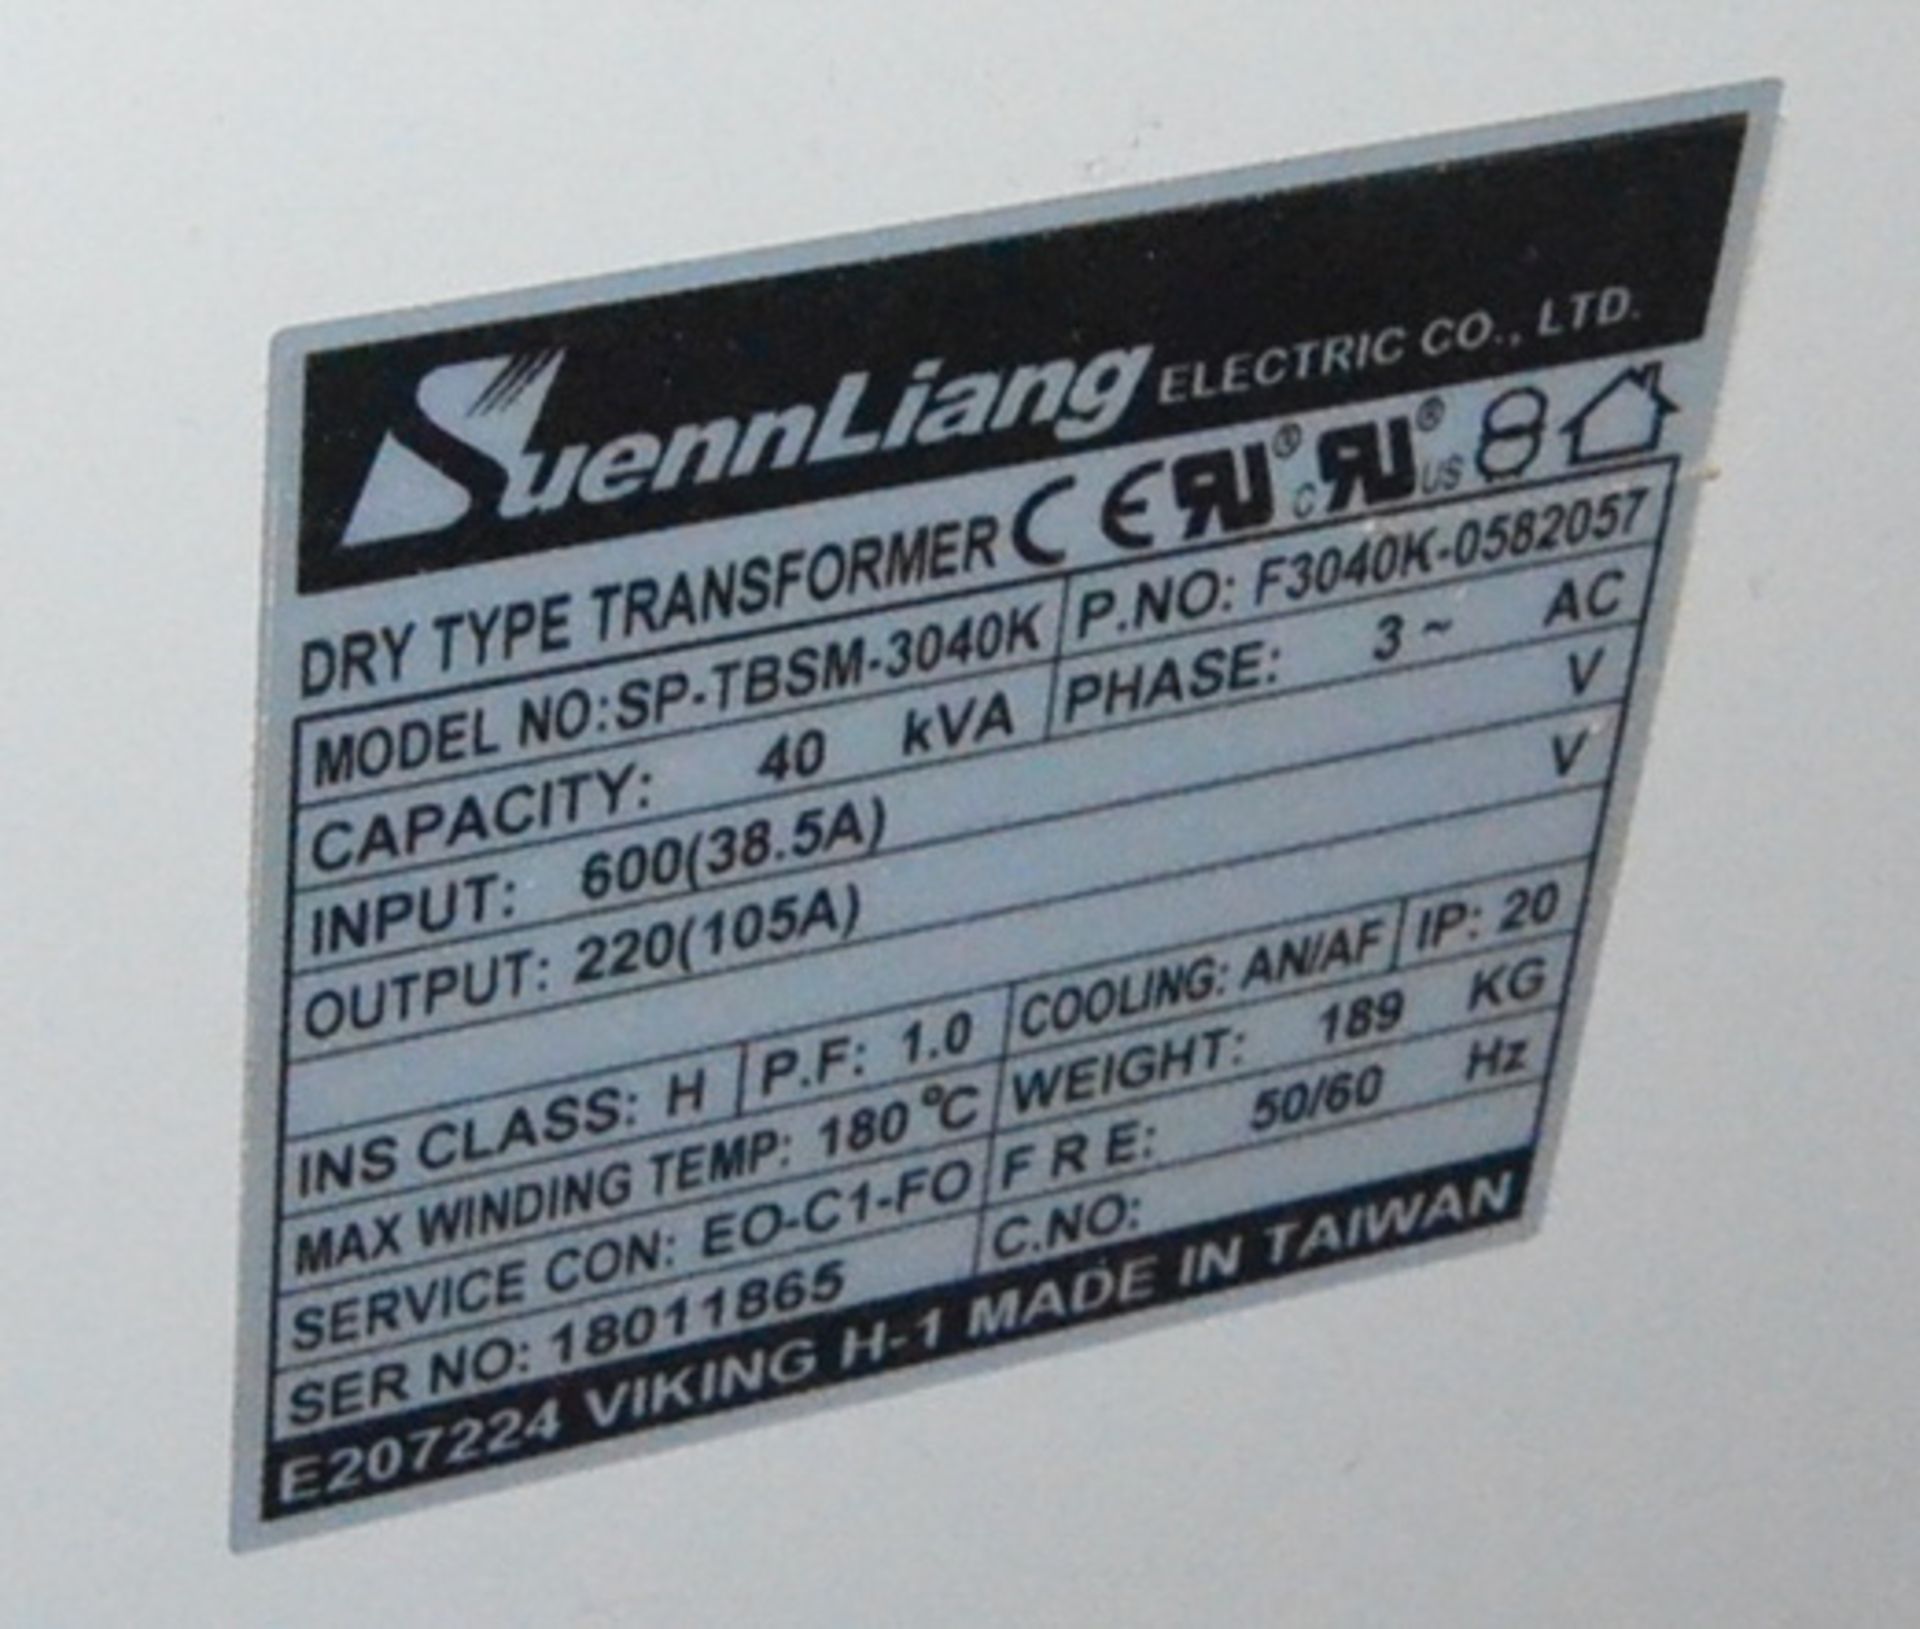 SUENN LIANG 40 KVA TRANSFORMER WITH 600 INPUT VOLTAGE, 220 OUTPUT VOLTAGE, 3 PH, 50/60 HZ, S/N: - Image 2 of 2